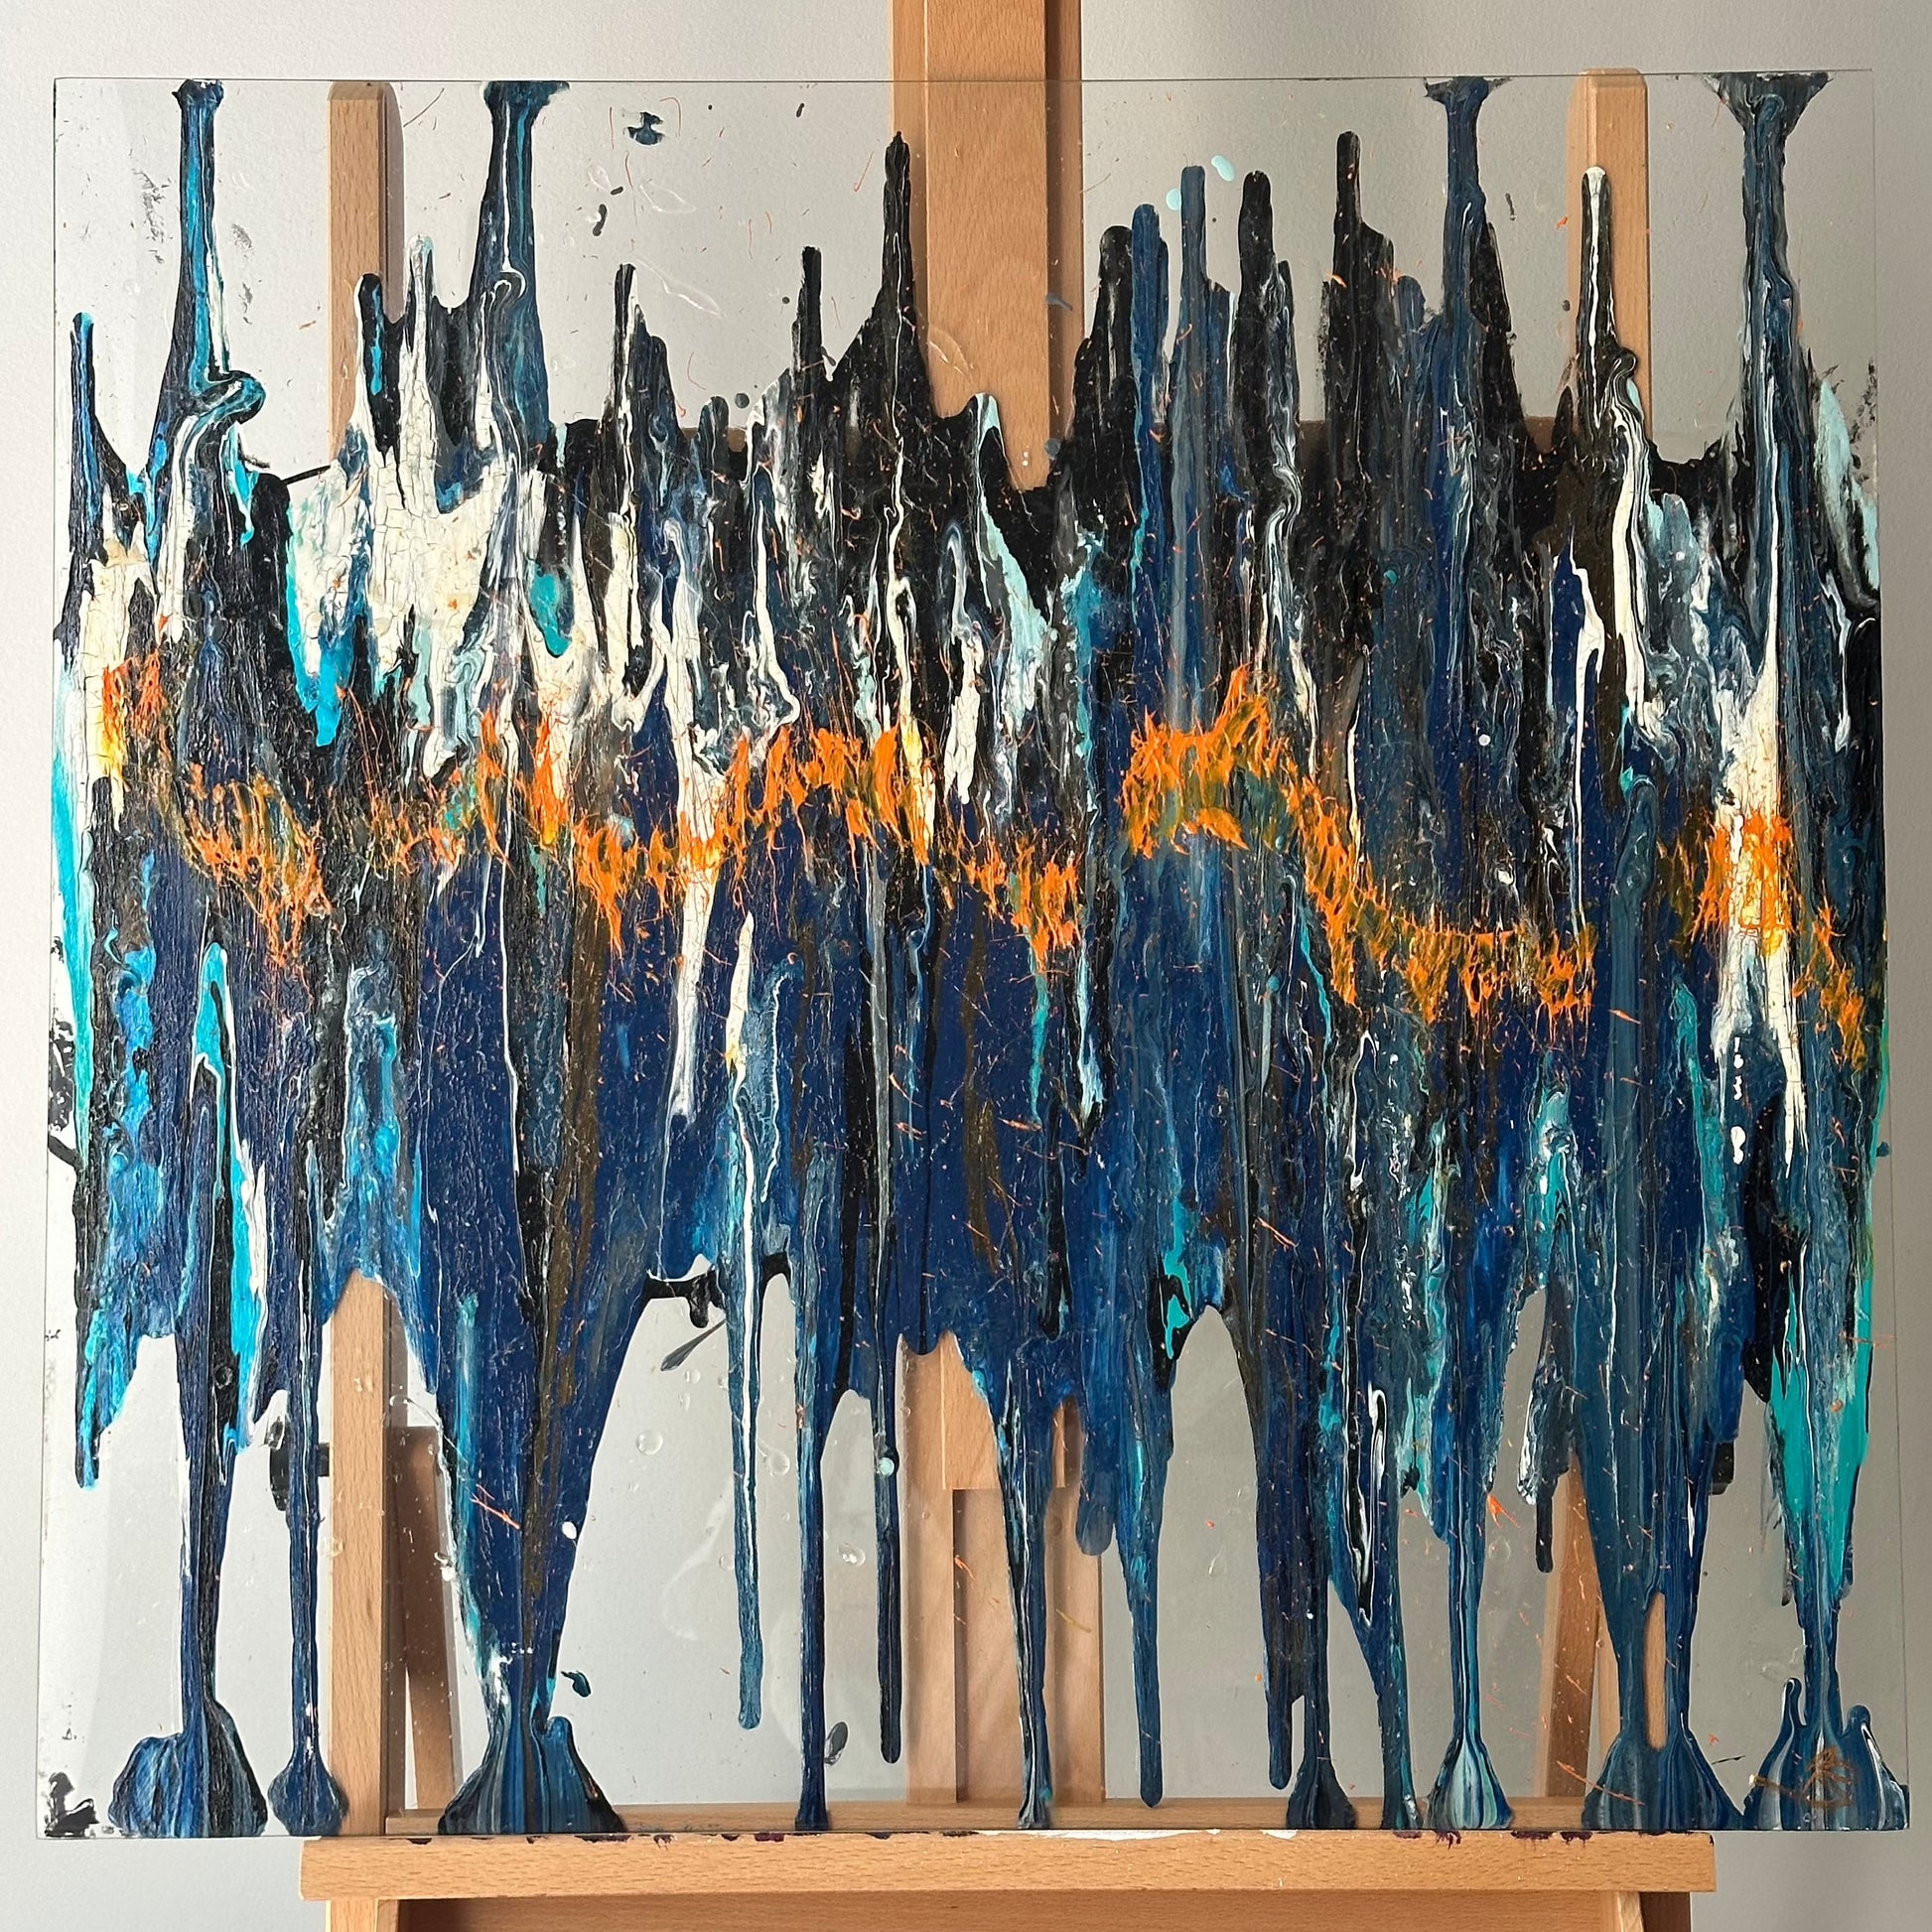 Head Above Water is an abstract piece on reclaimed glass incorporating varying shades of blue and black. To add depth and richness to the painting traces of orange and black are used.